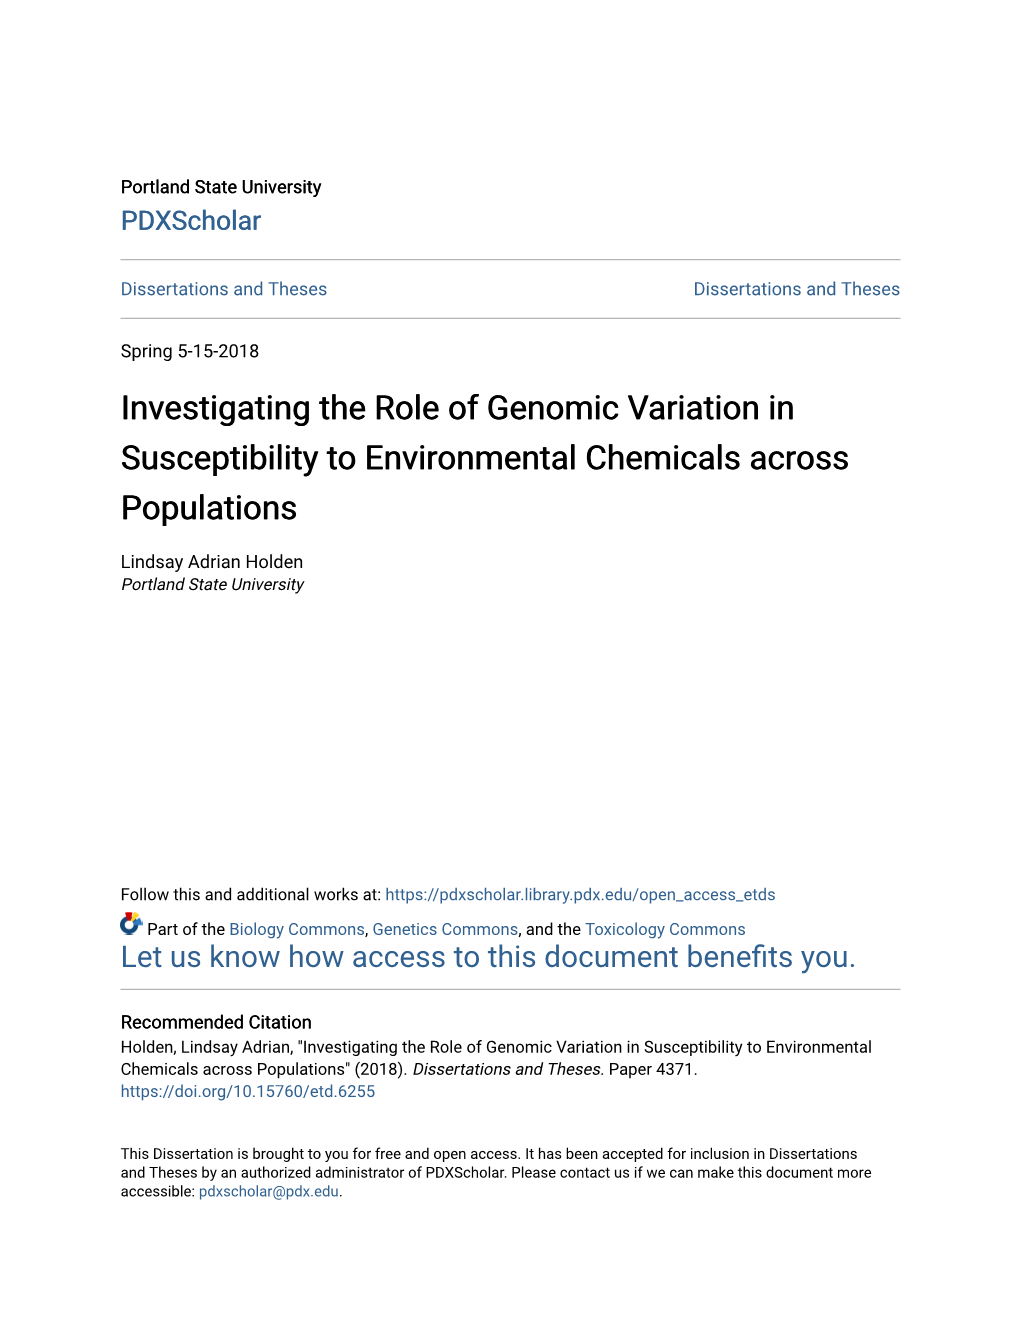 Investigating the Role of Genomic Variation in Susceptibility to Environmental Chemicals Across Populations